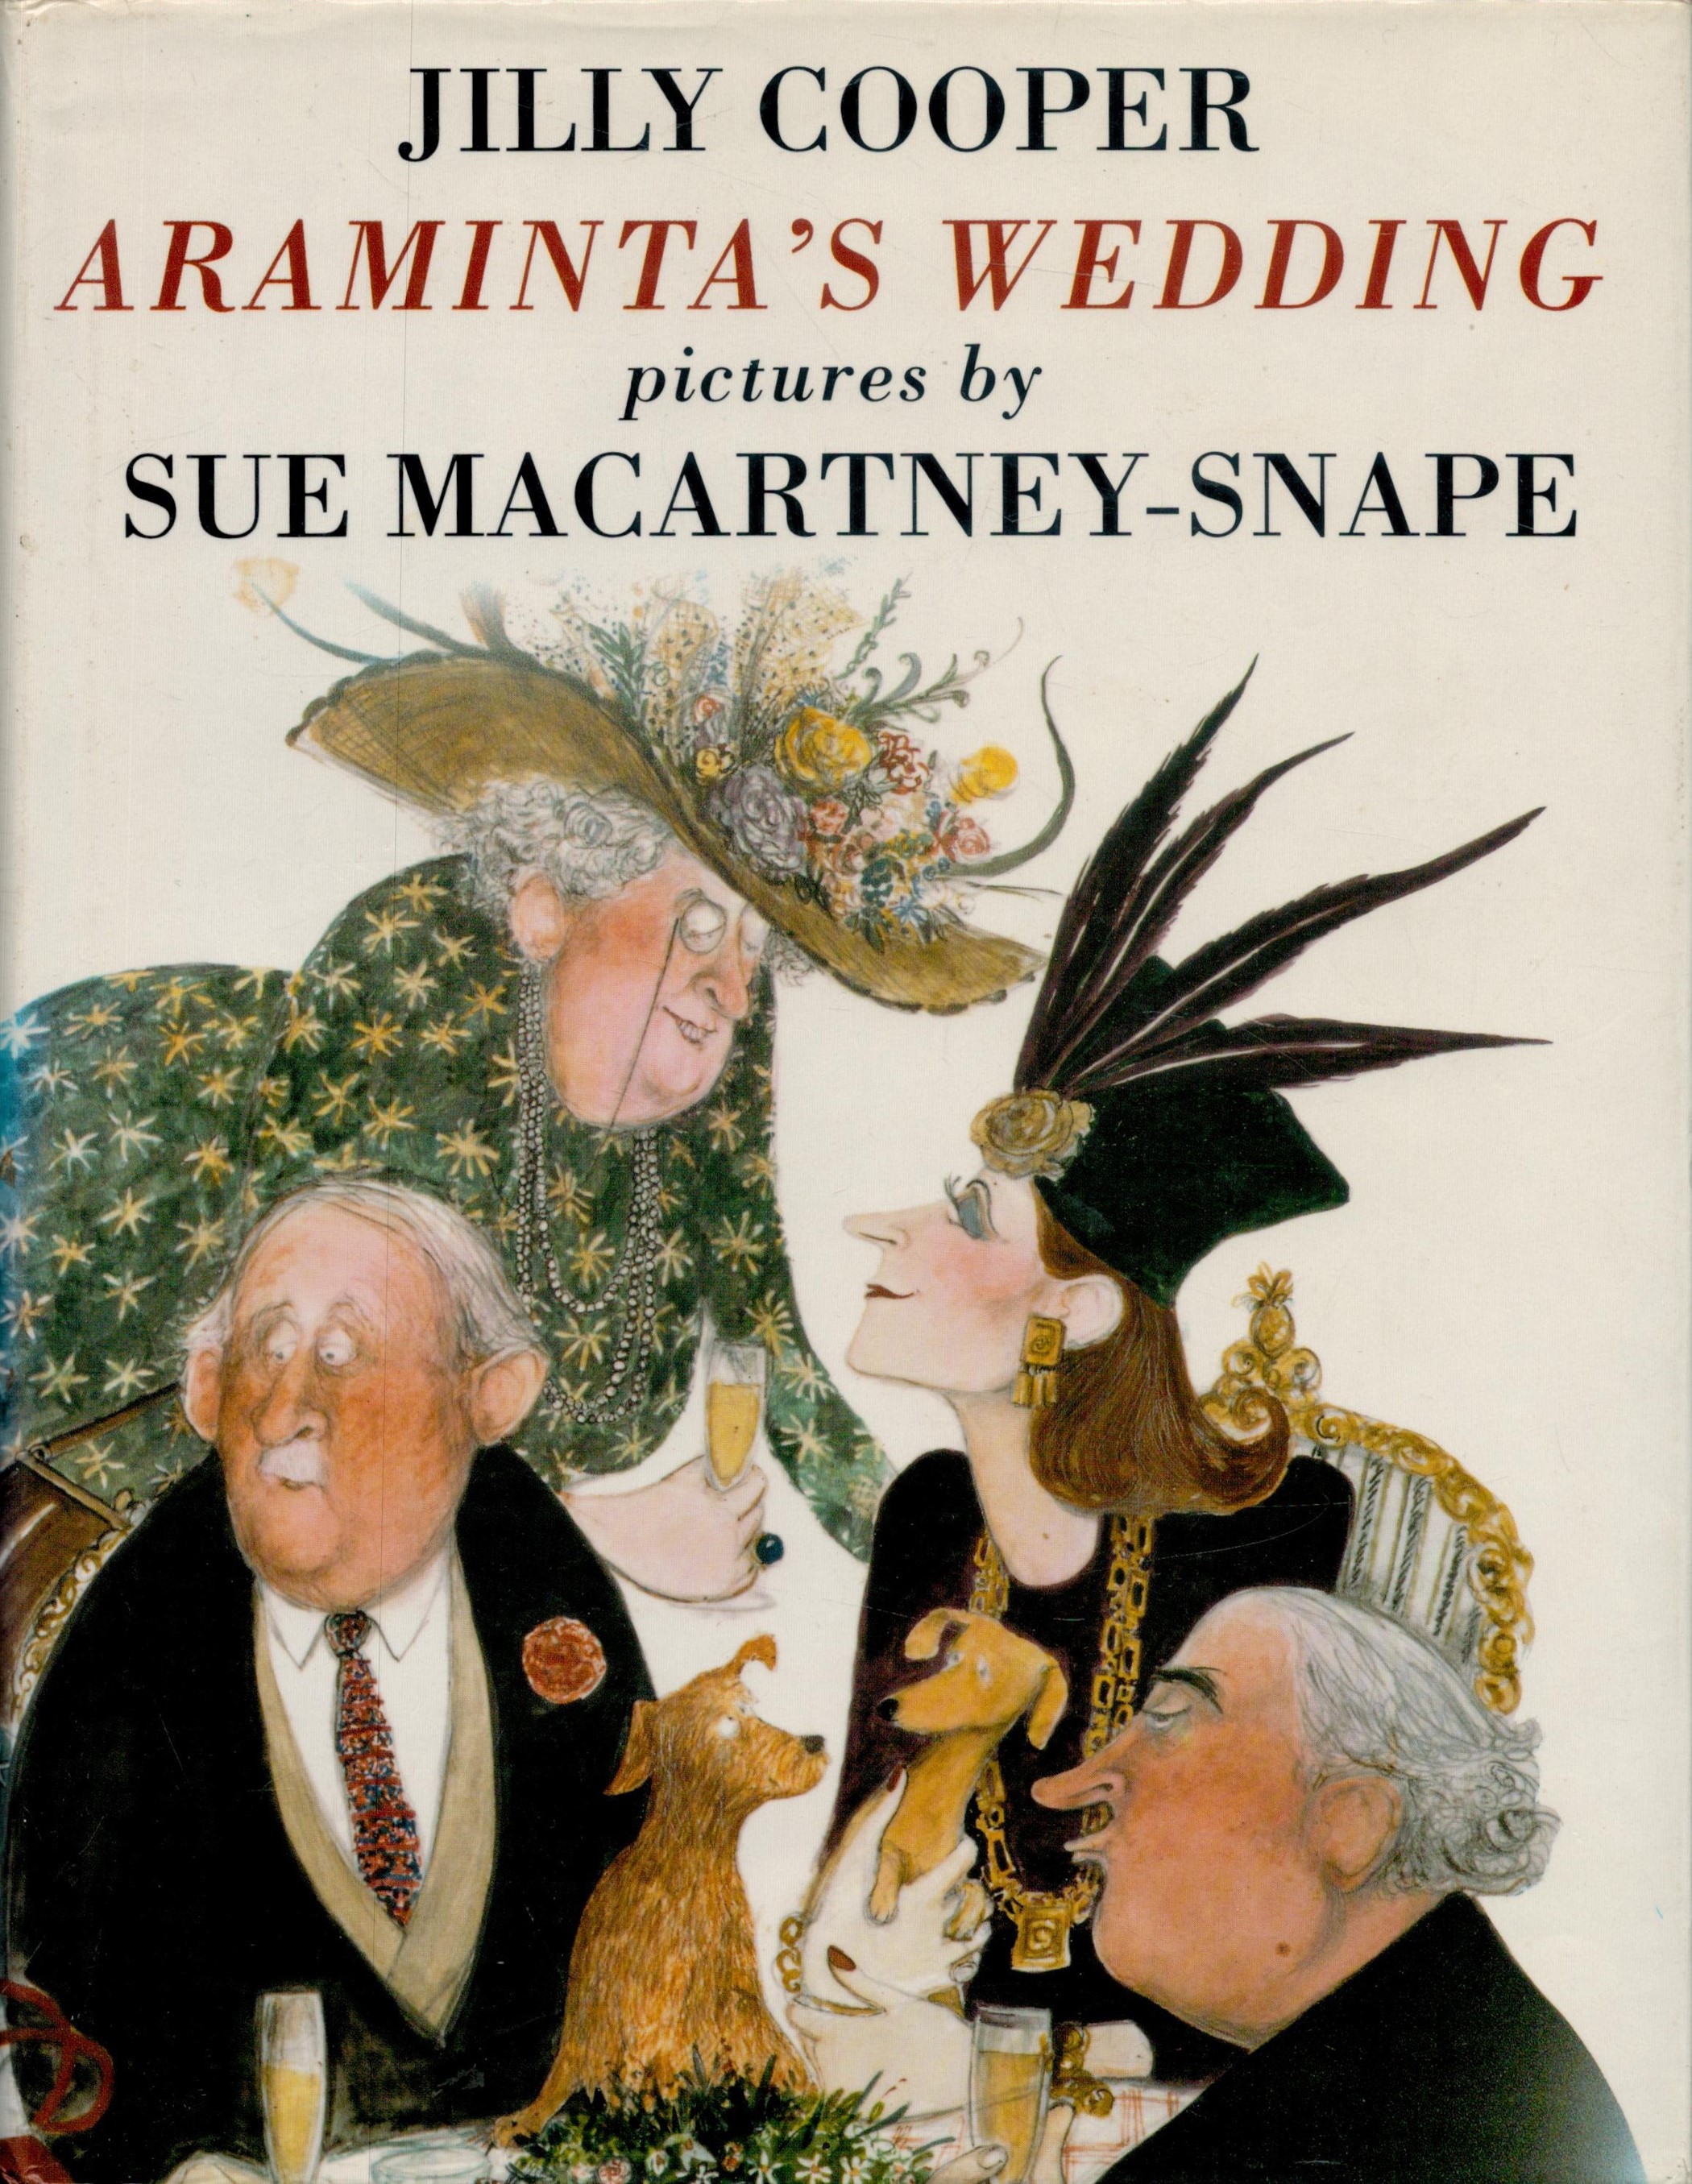 Araminta's Wedding or Fortune Secured - A Country House Extravaganza by Jilly Cooper 1993 First